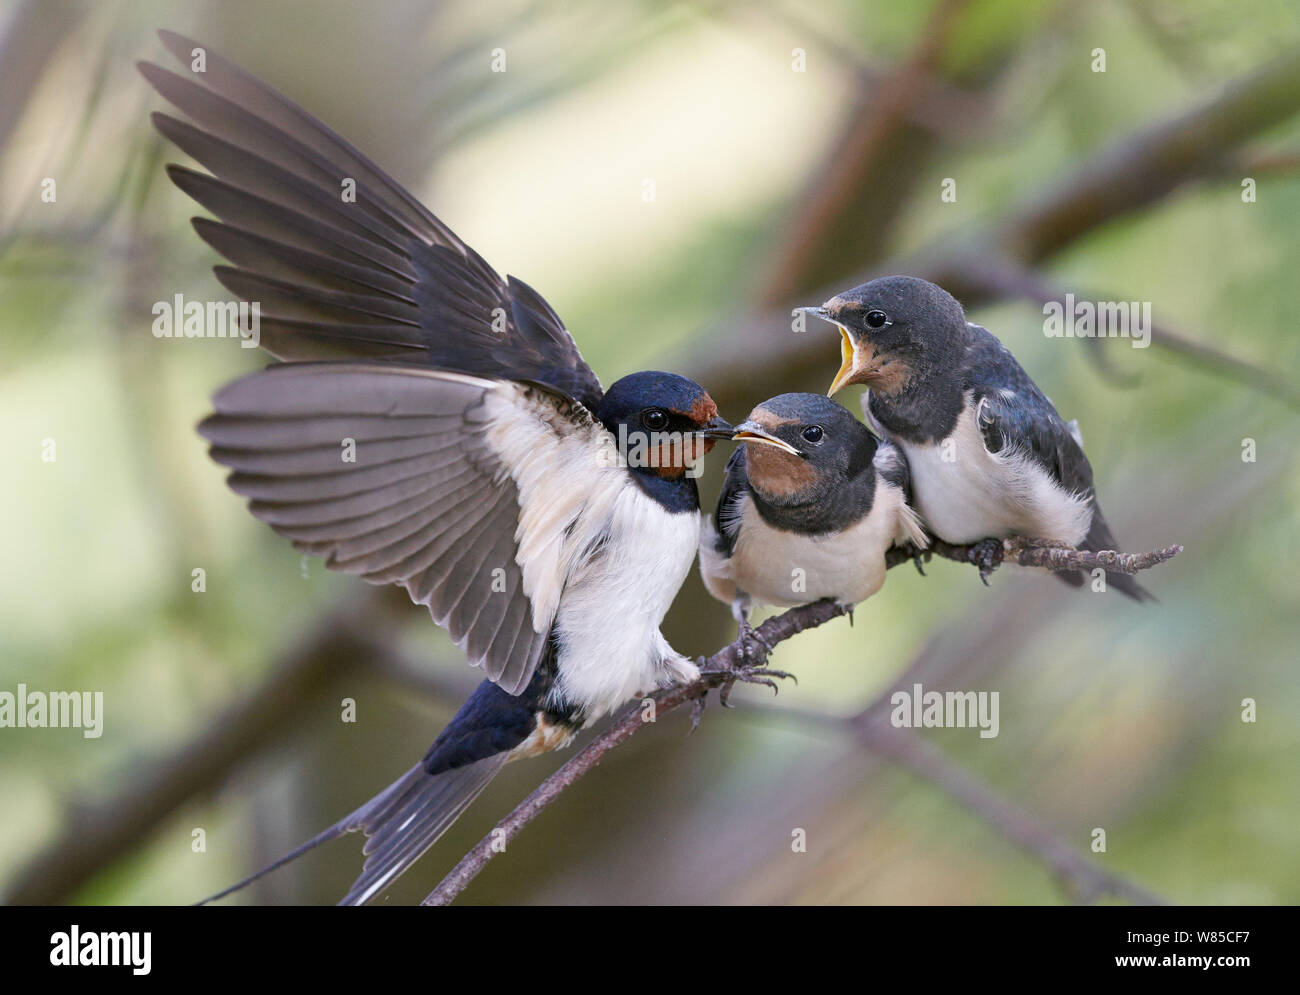 Swallow (Hirundo rustica) feeding one of two chicks, the other with beak wide open, Uto, Finland, July. Stock Photo